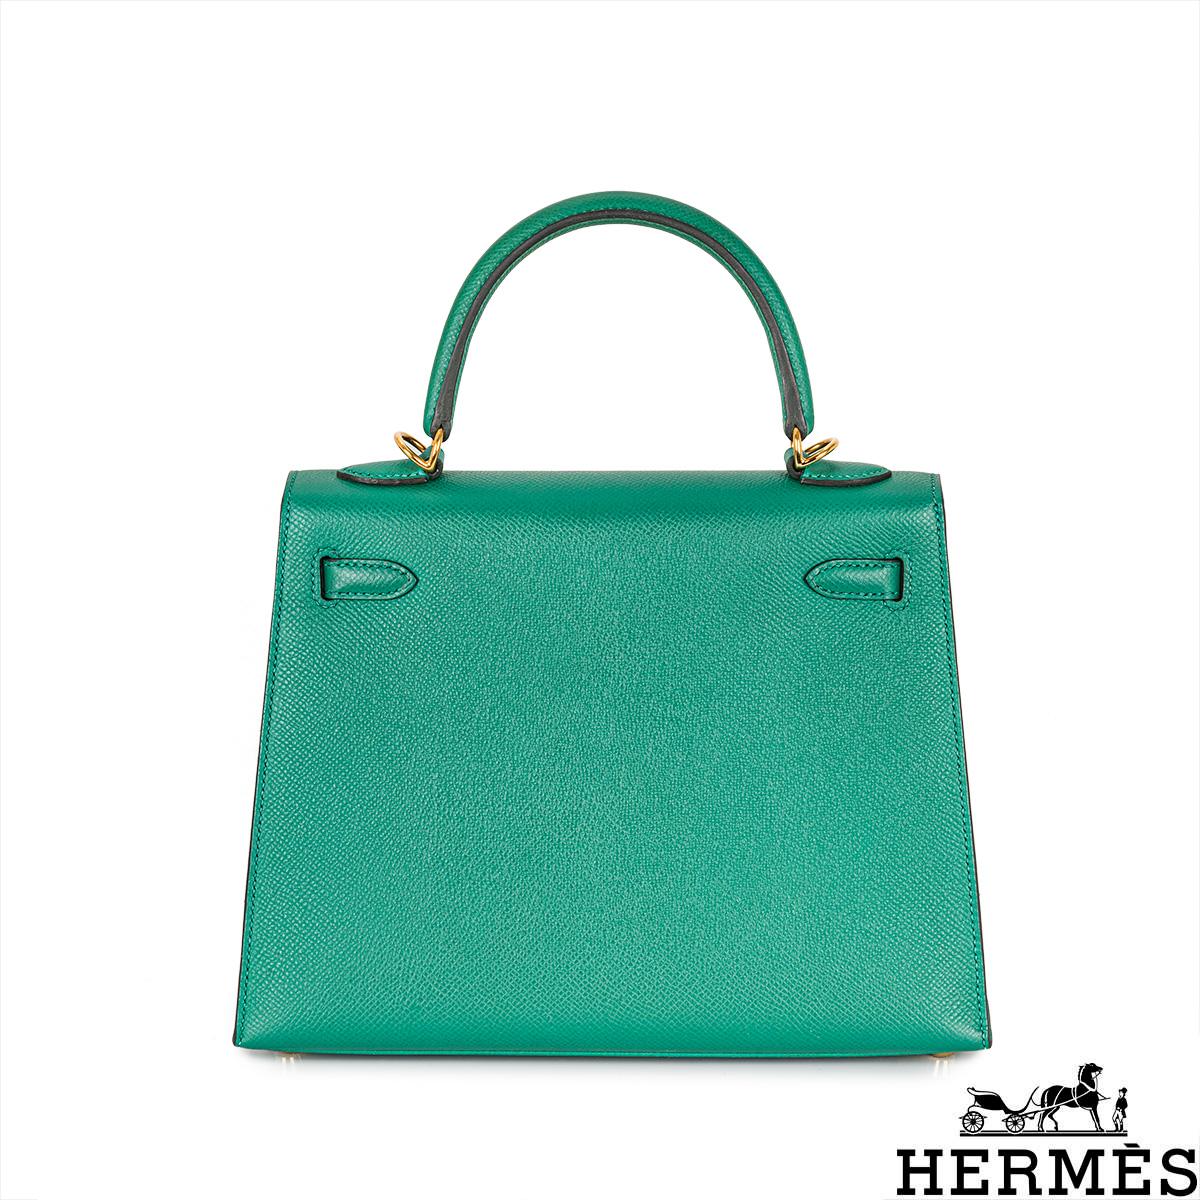 Hermés Kelly Sellier 25cm Vert Verone Veau Epsom GHW In Excellent Condition For Sale In London, GB